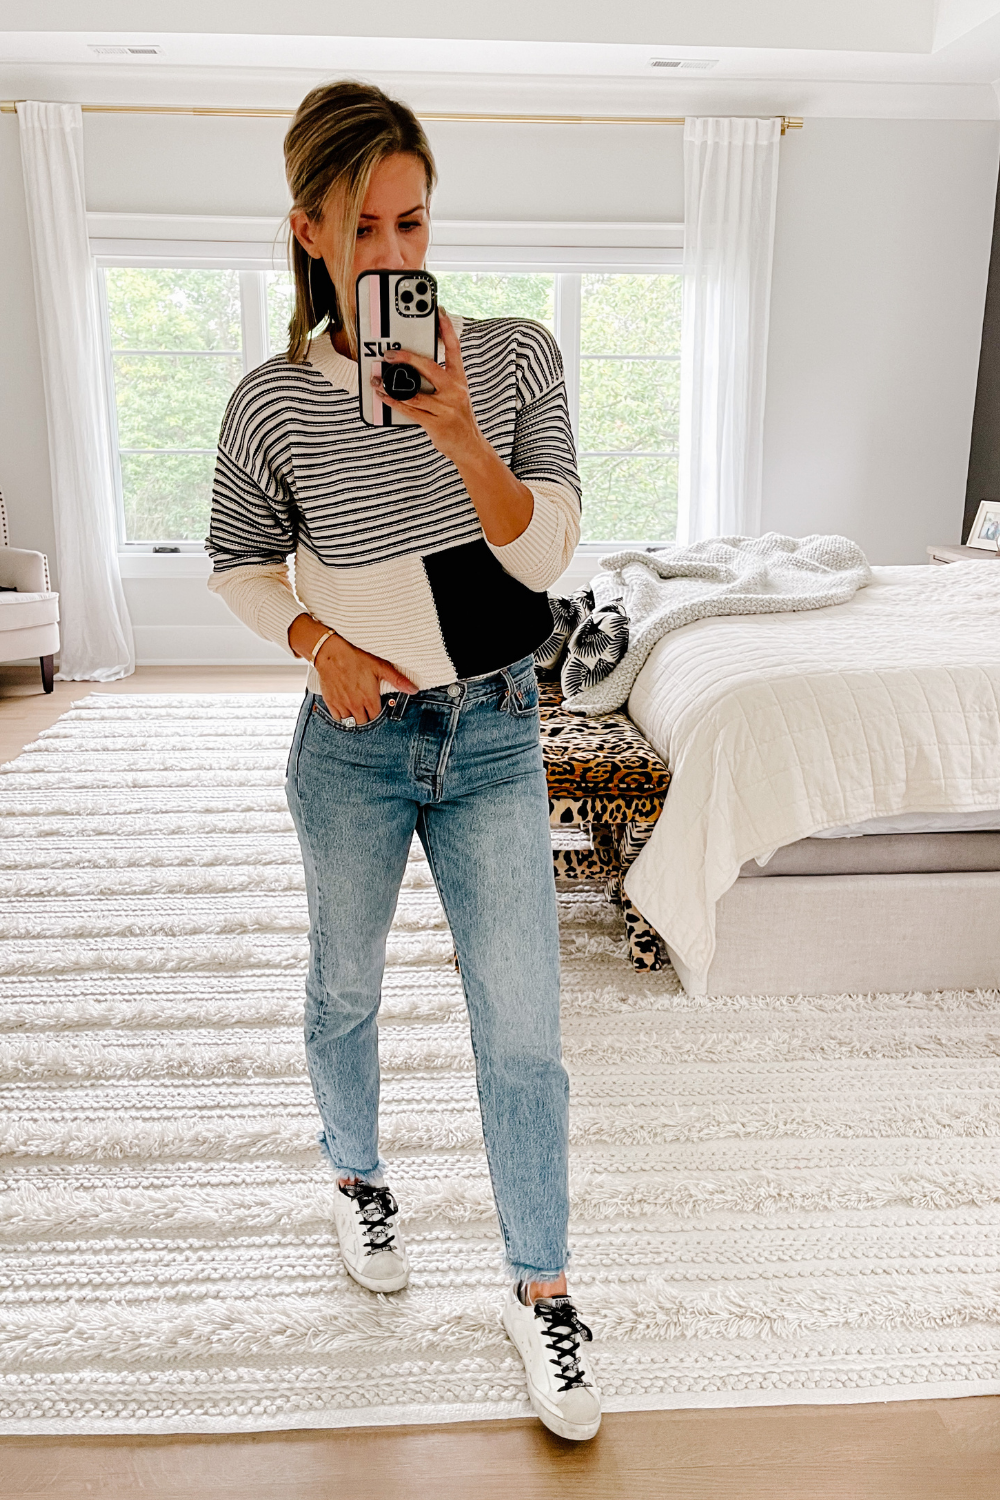 Suzanne wearing an Amazon colorblock sweater, denim jeans, and Golden Goose shoes